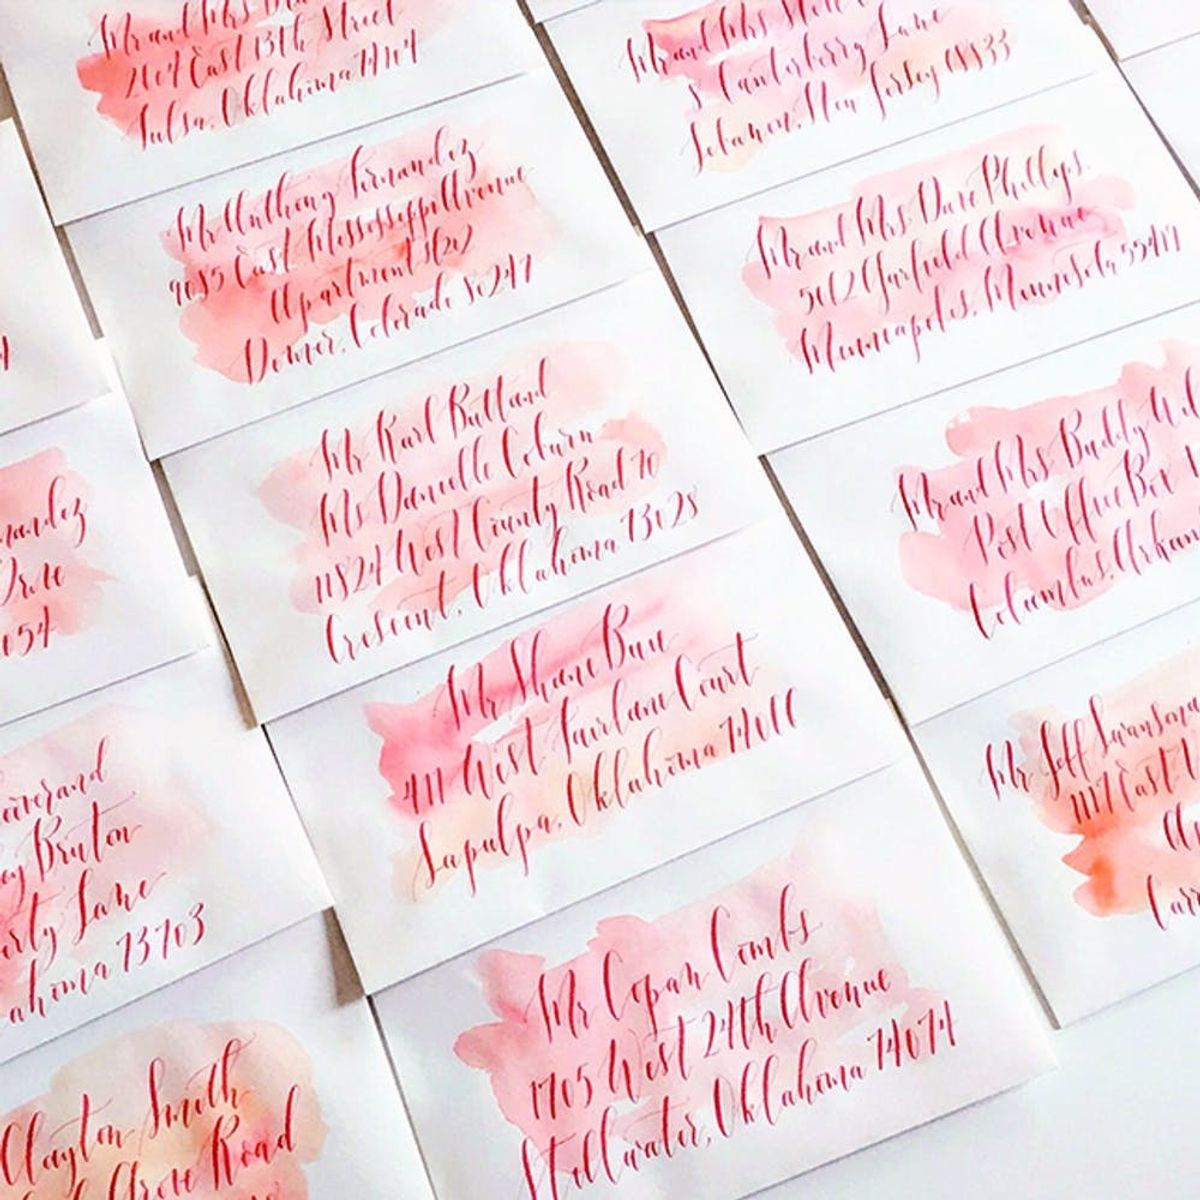 Take This Calligraphy Challenge: 9 New Calligraphy Projects (+ Business Advice) With Lauren Essl